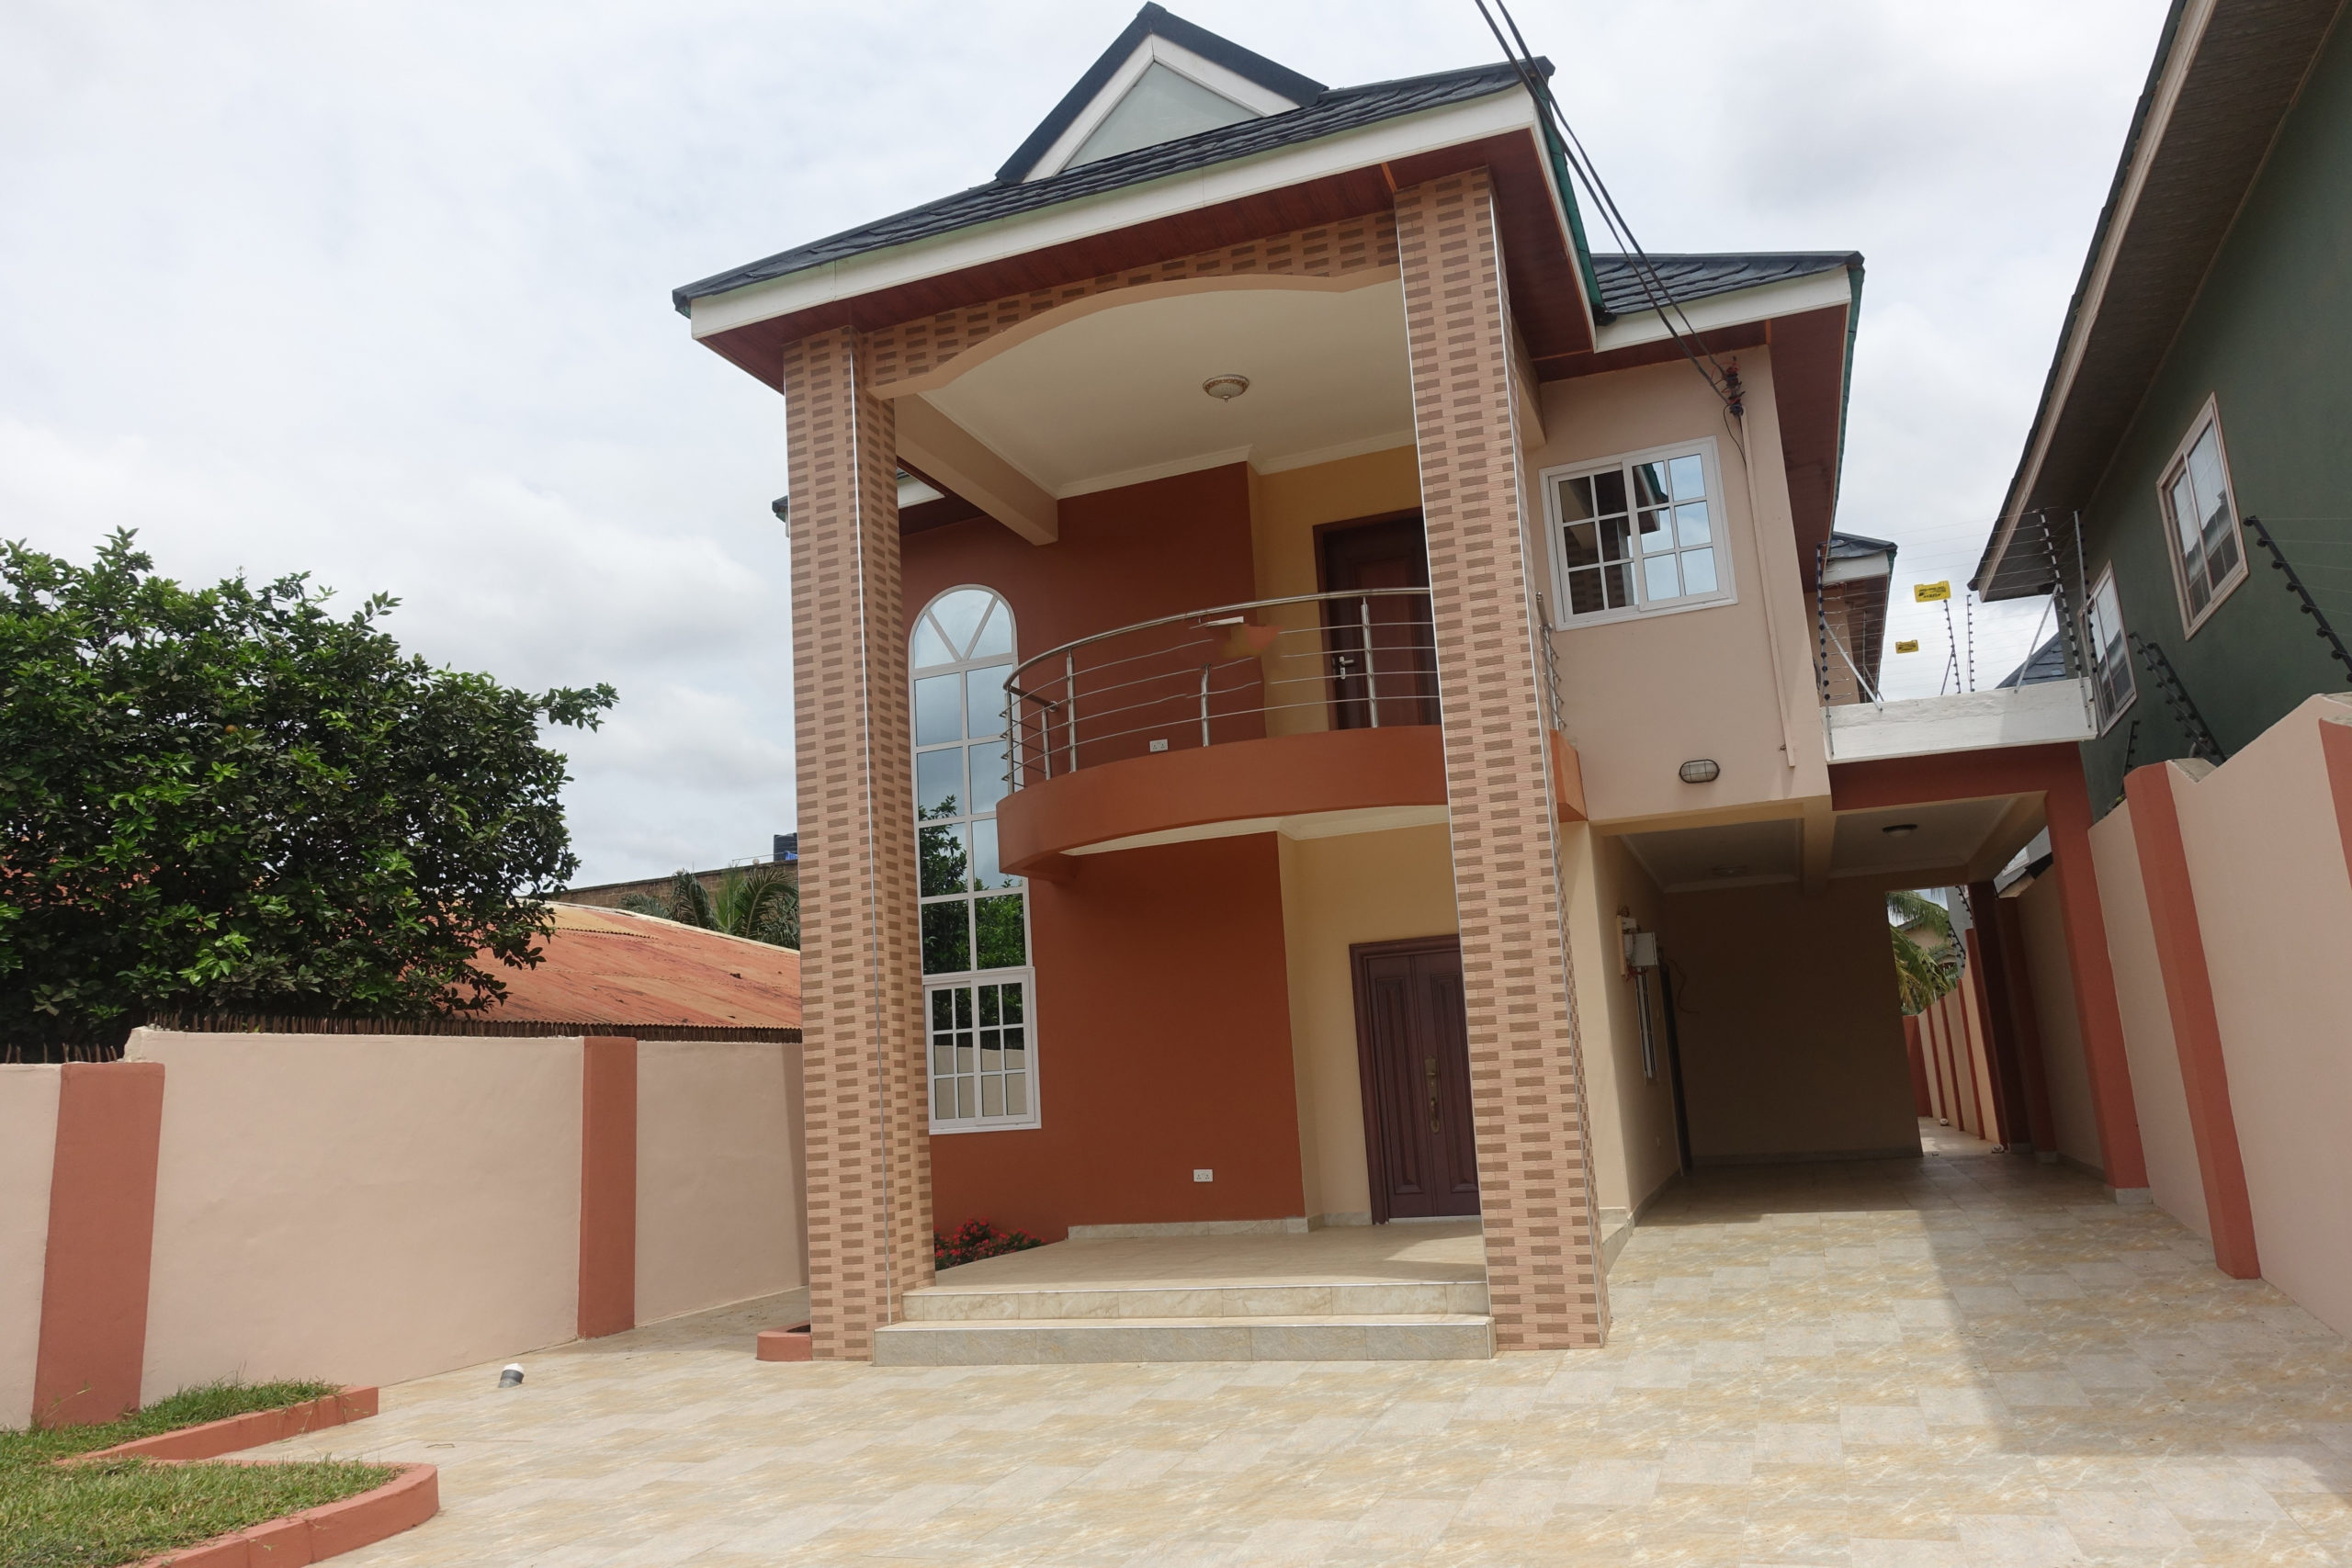 4 BEDROOM HOUSE FOR SALE IN WEST LEGON